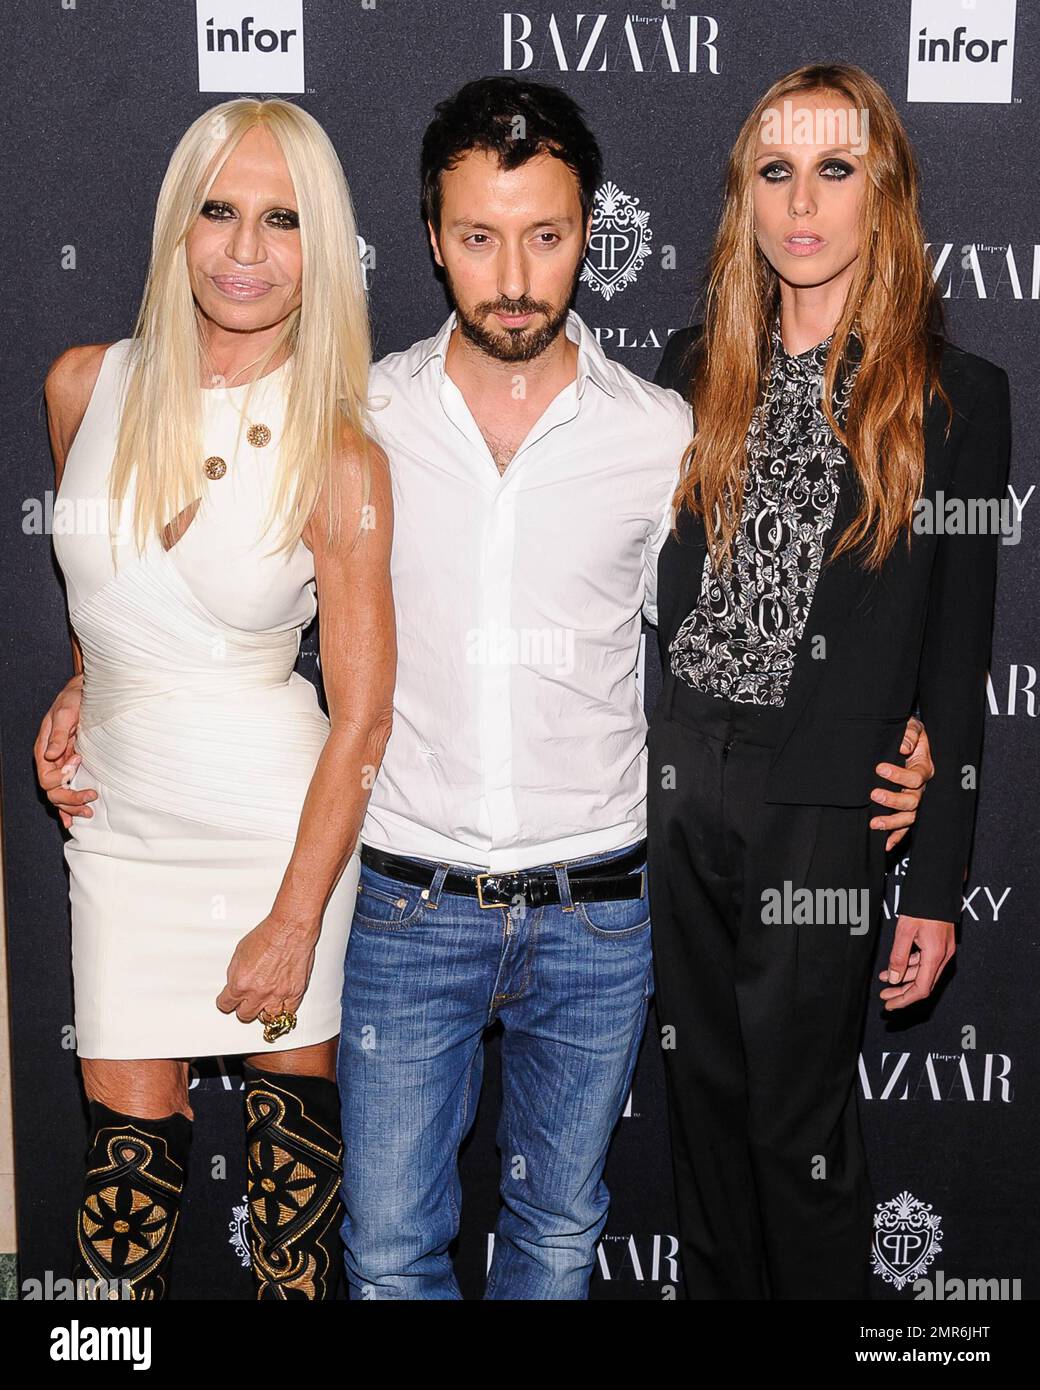 Donatella Versace, Anthony Vaccariello and Allegra Beck Versace at Harper’s Bazaar Celebrates ICONS by Carine Rotifeld held at The Plaza Hotel in New York, NY. September 5, 2014 Stock Photo